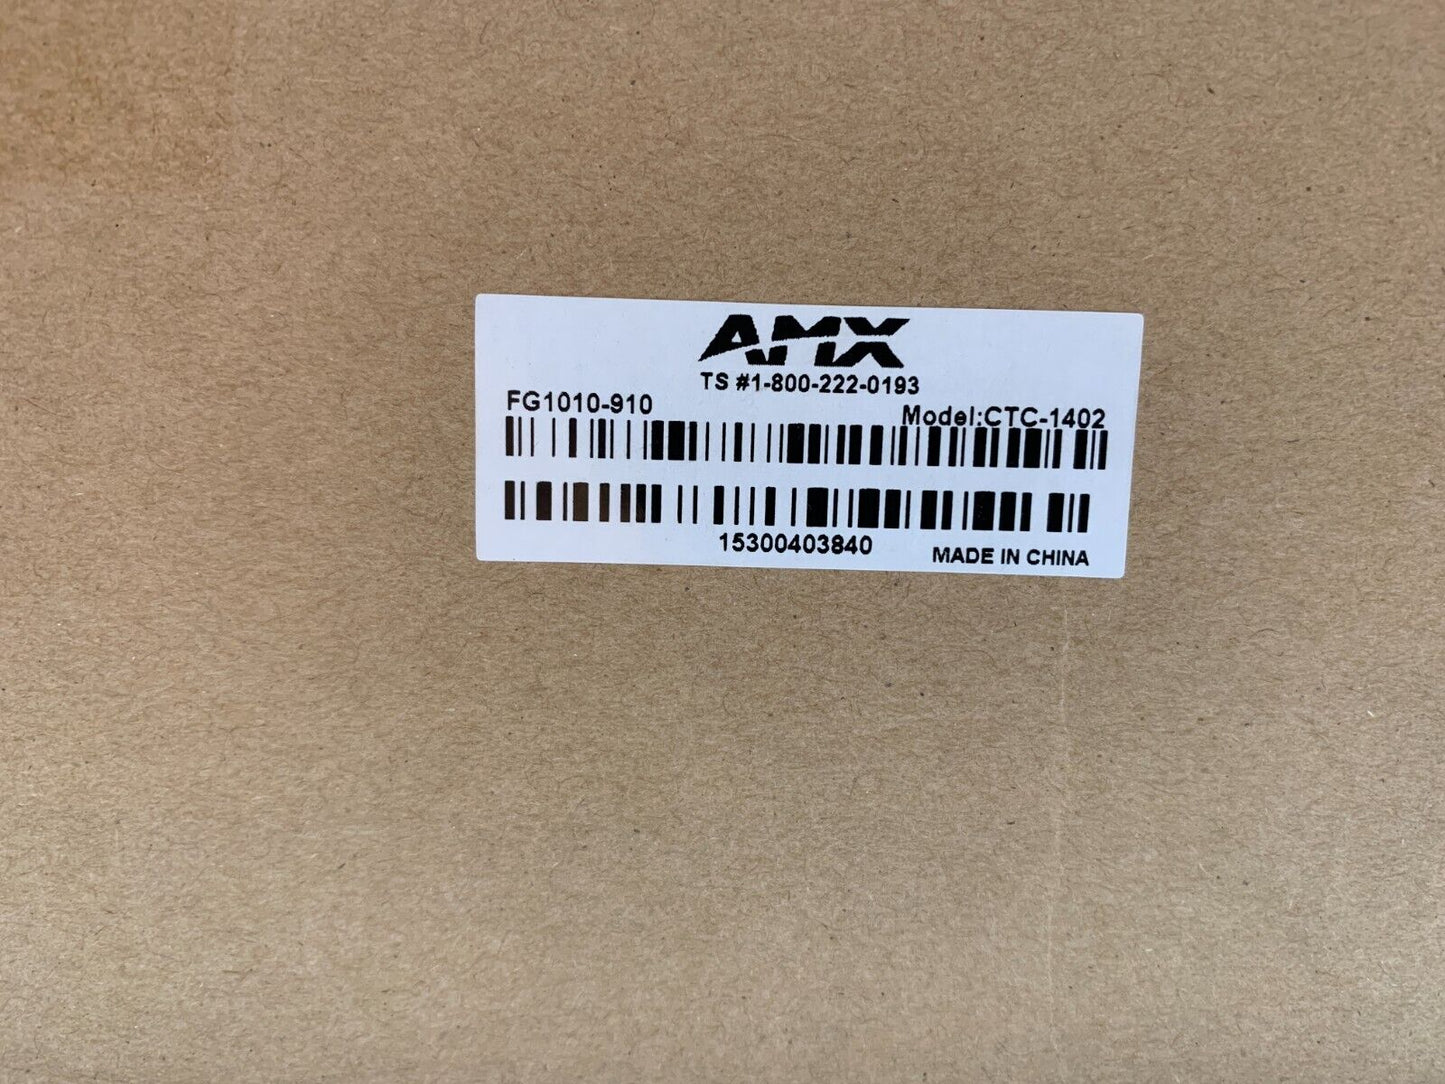 AMX CTC1402 Conferencing Connectivity and Transport Kit FG1010-910